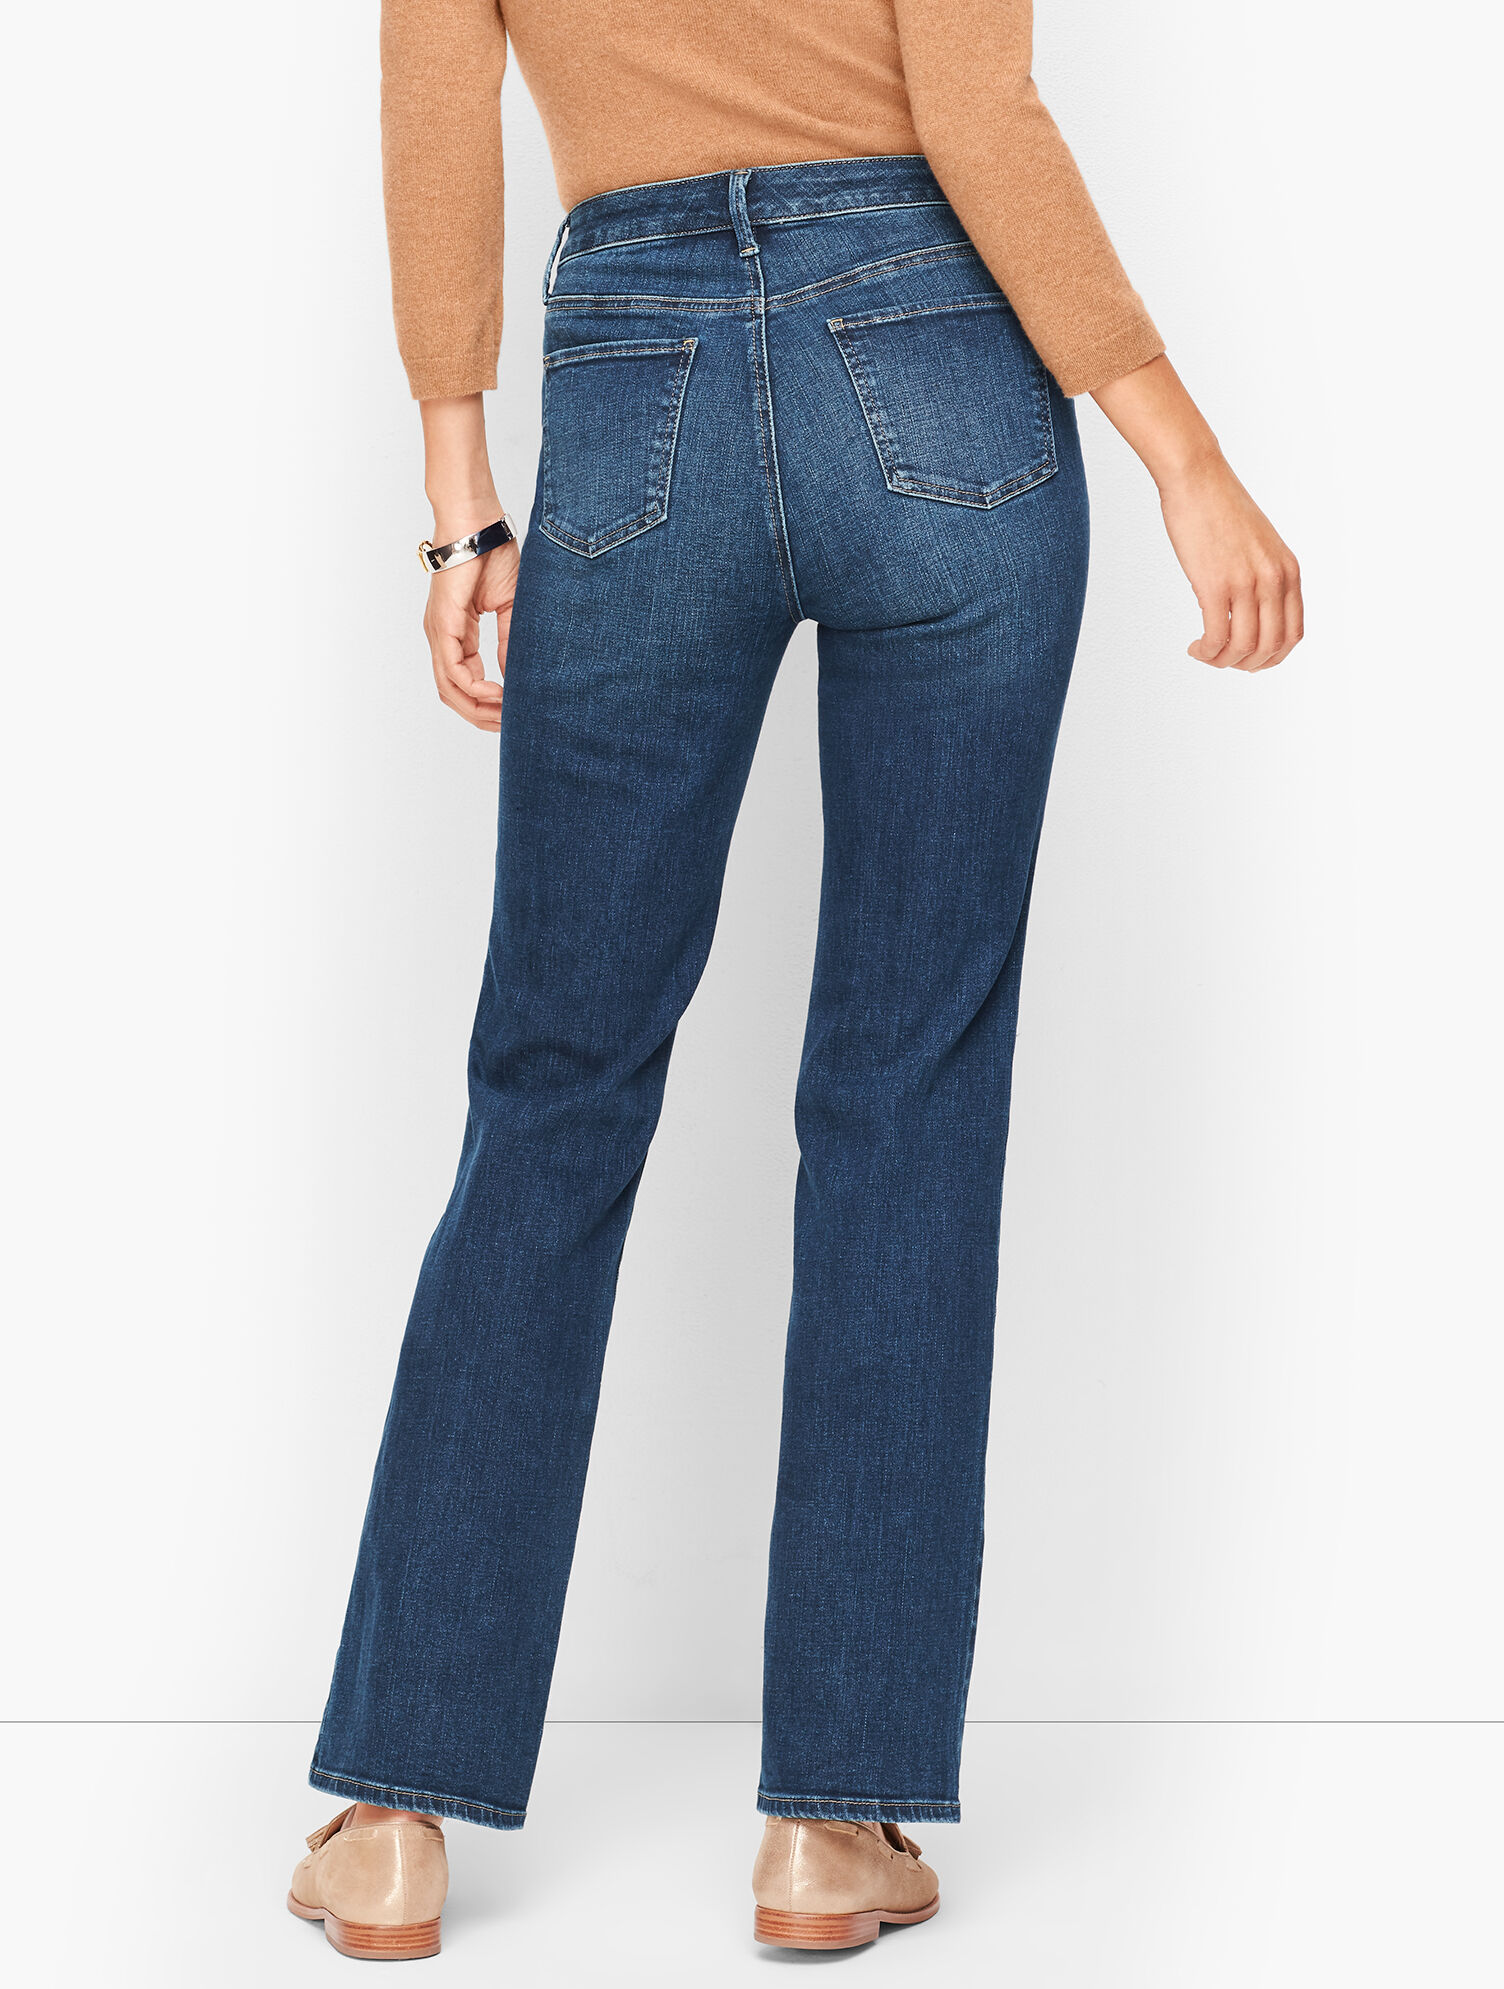 Barely Boot Jeans - Lexington Wash | Talbots